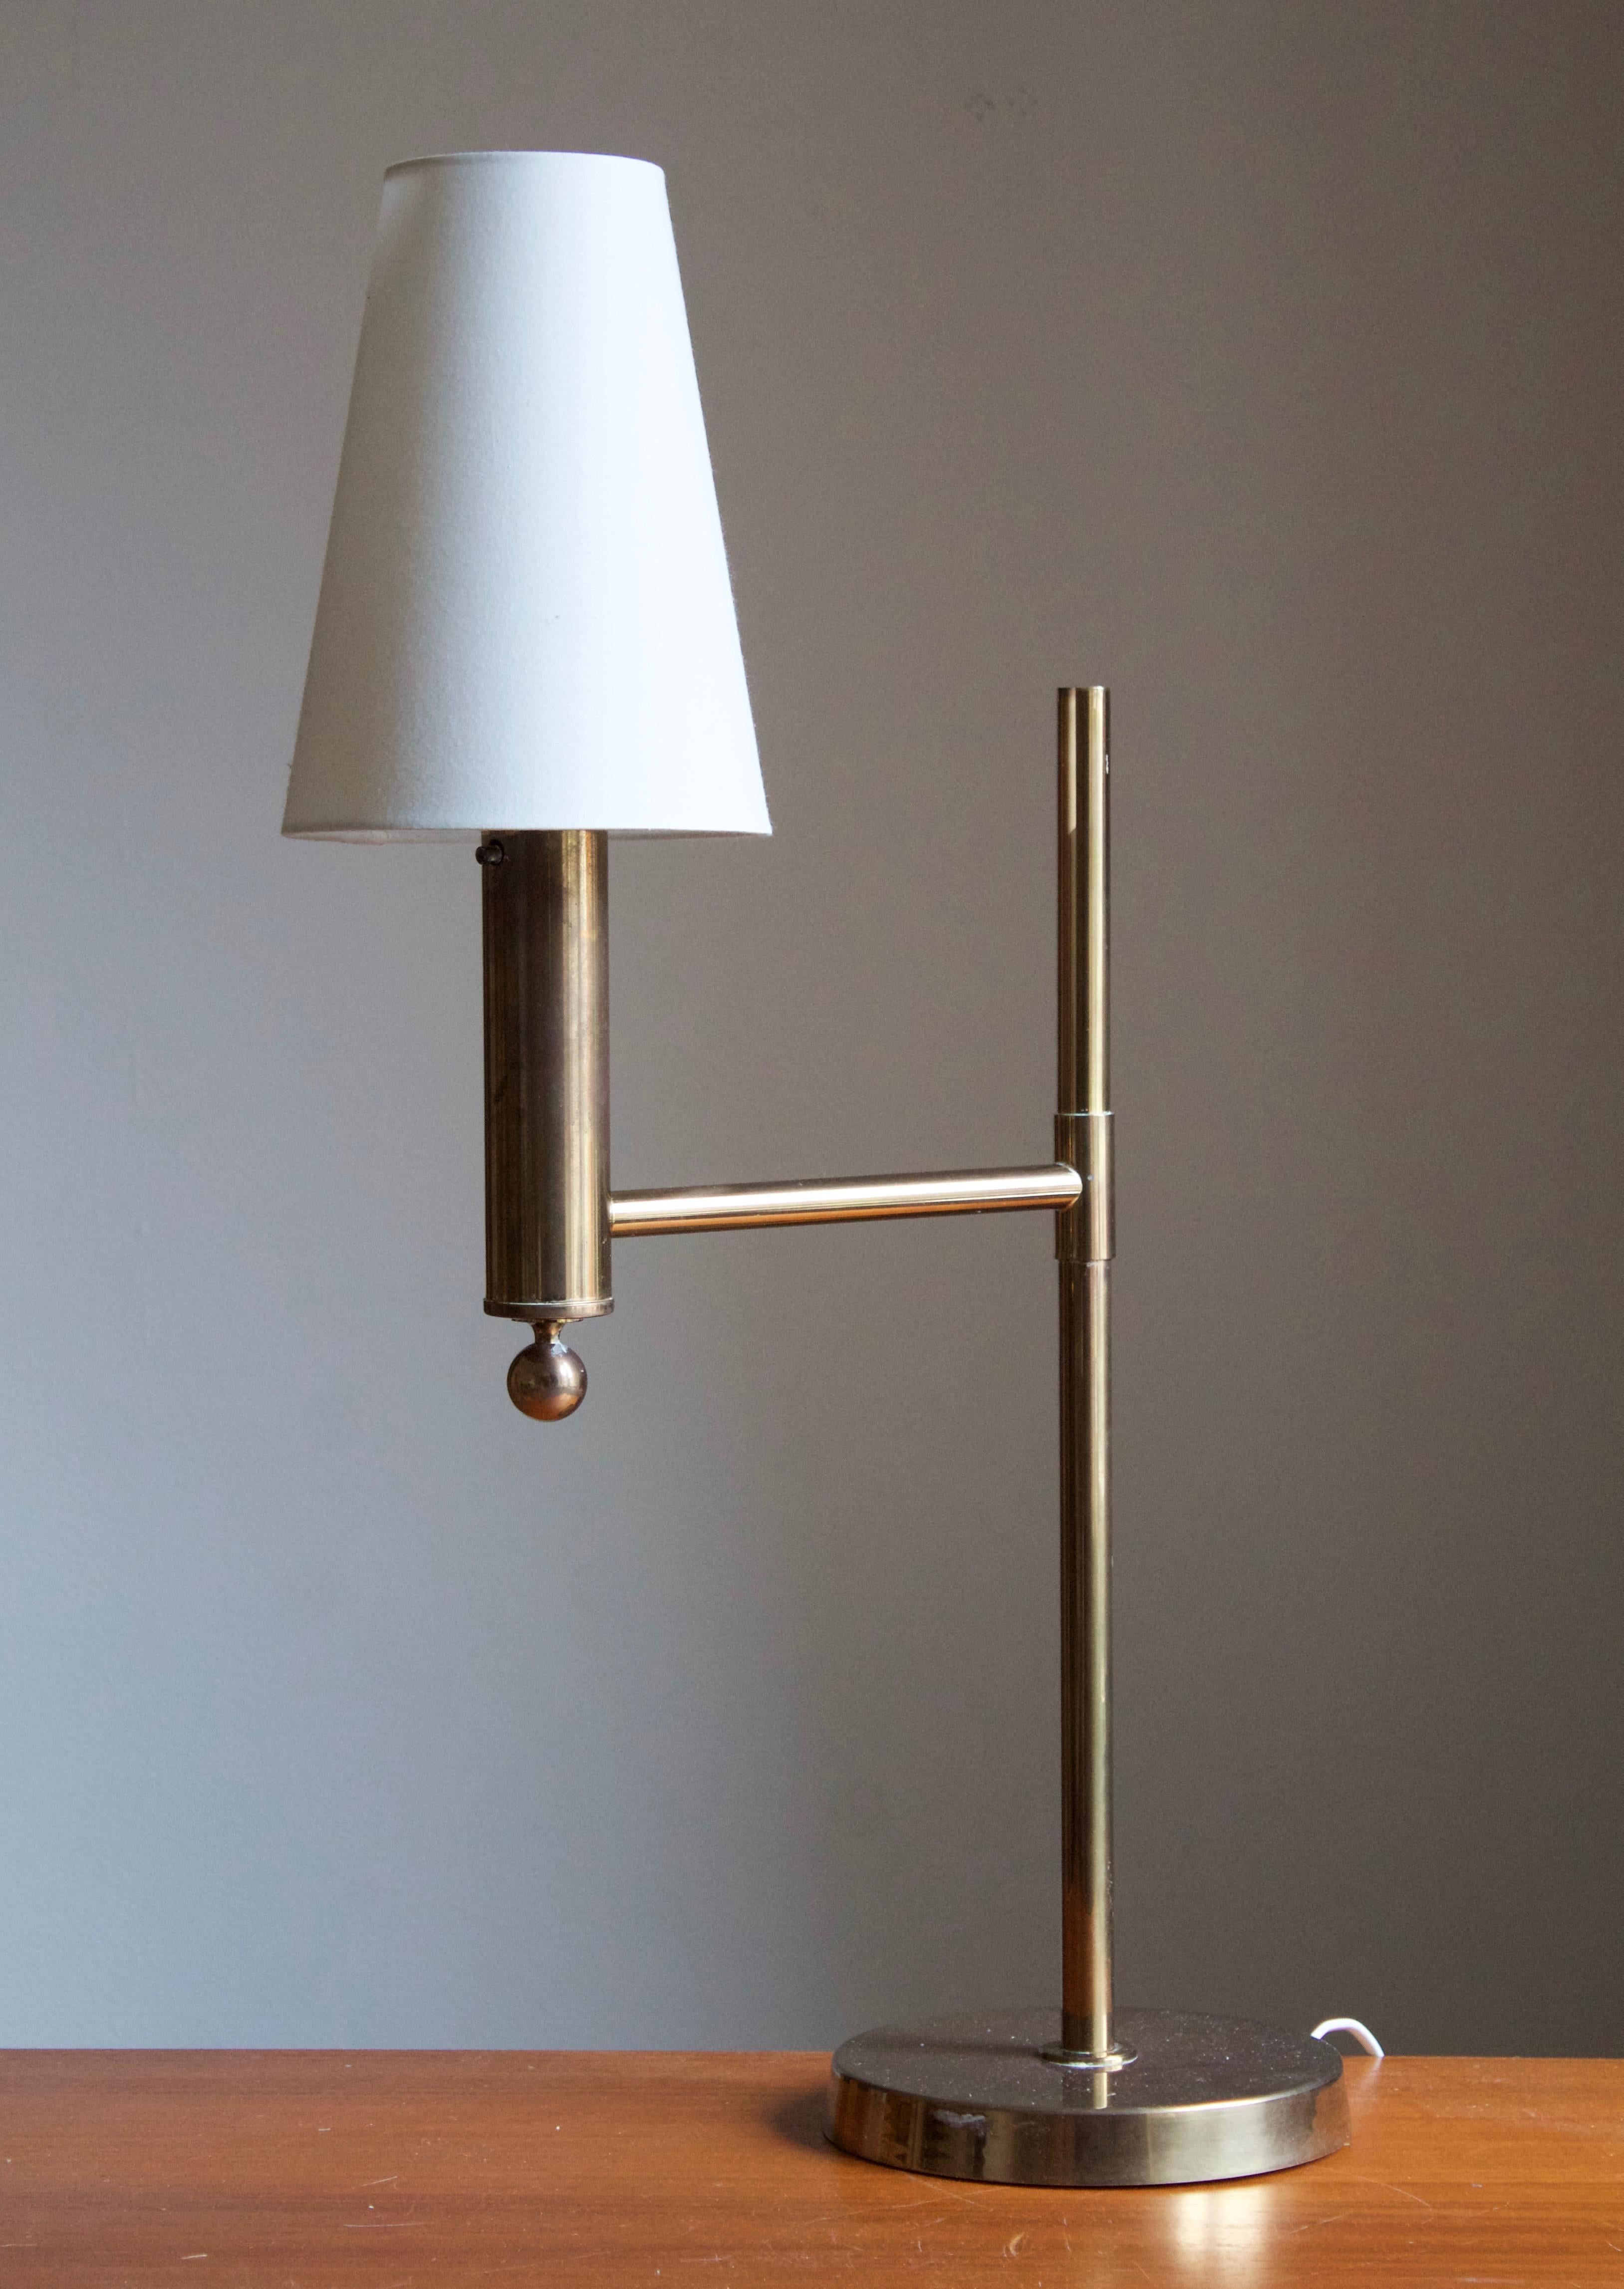 An sizable table lamp. Designed and produced by Bergboms, Sweden, c. 1970s.

Other designers of the period include Paavo Tynell, Hans Bergström, Josef Frank, and Kaare Klint.